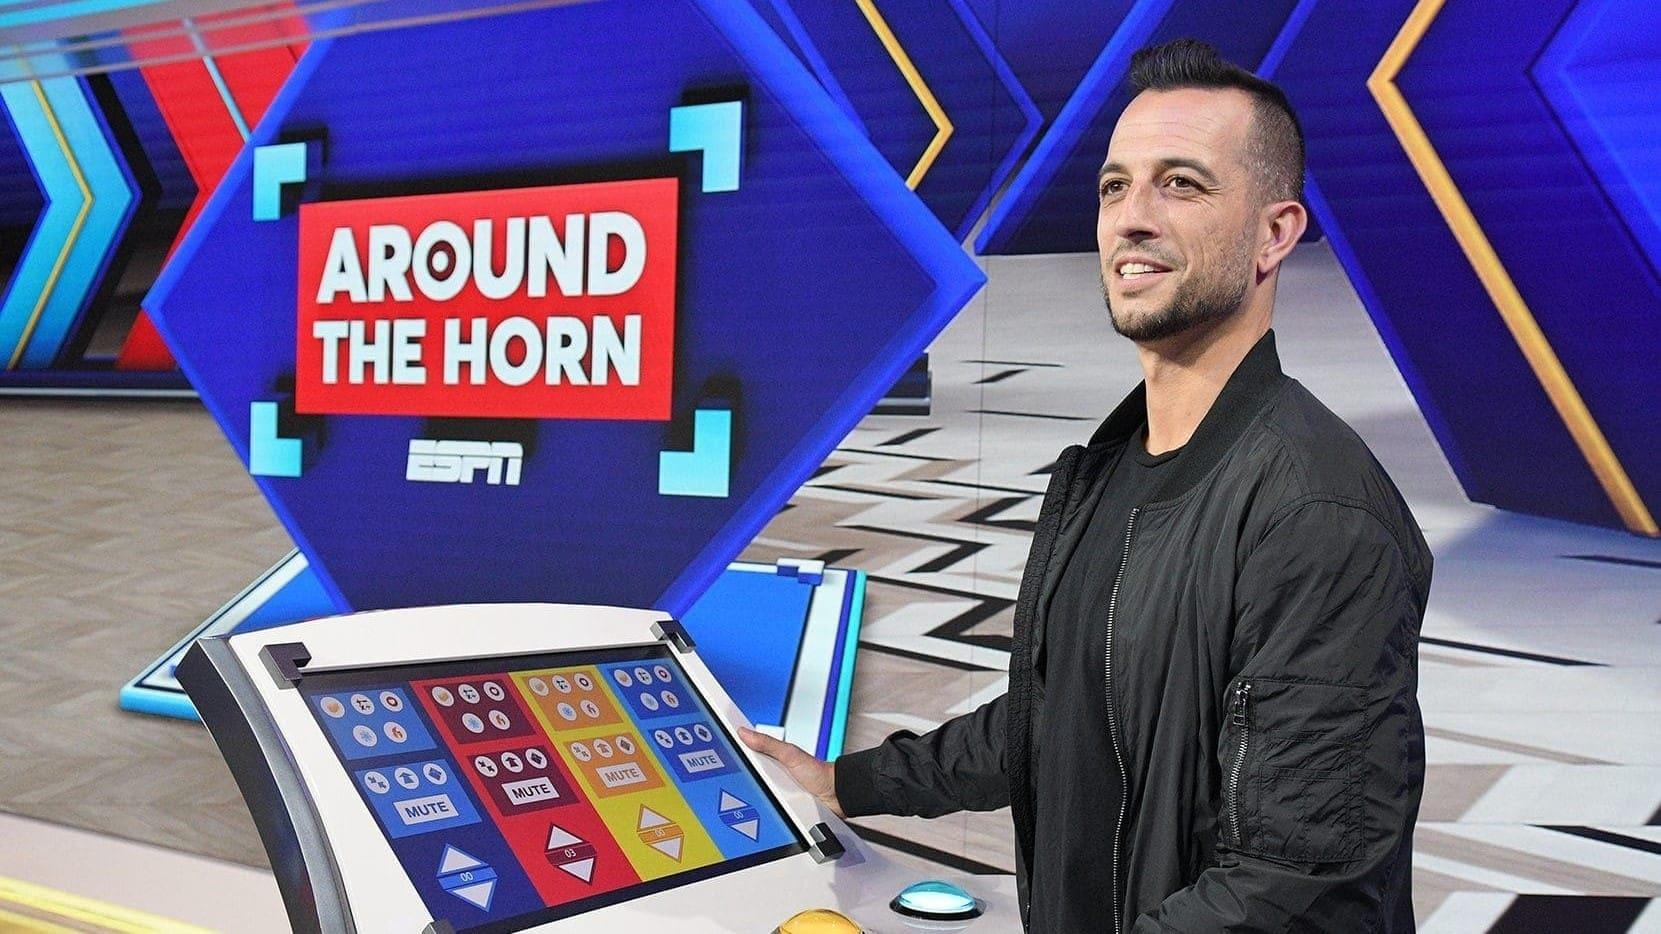 Around the Horn backdrop